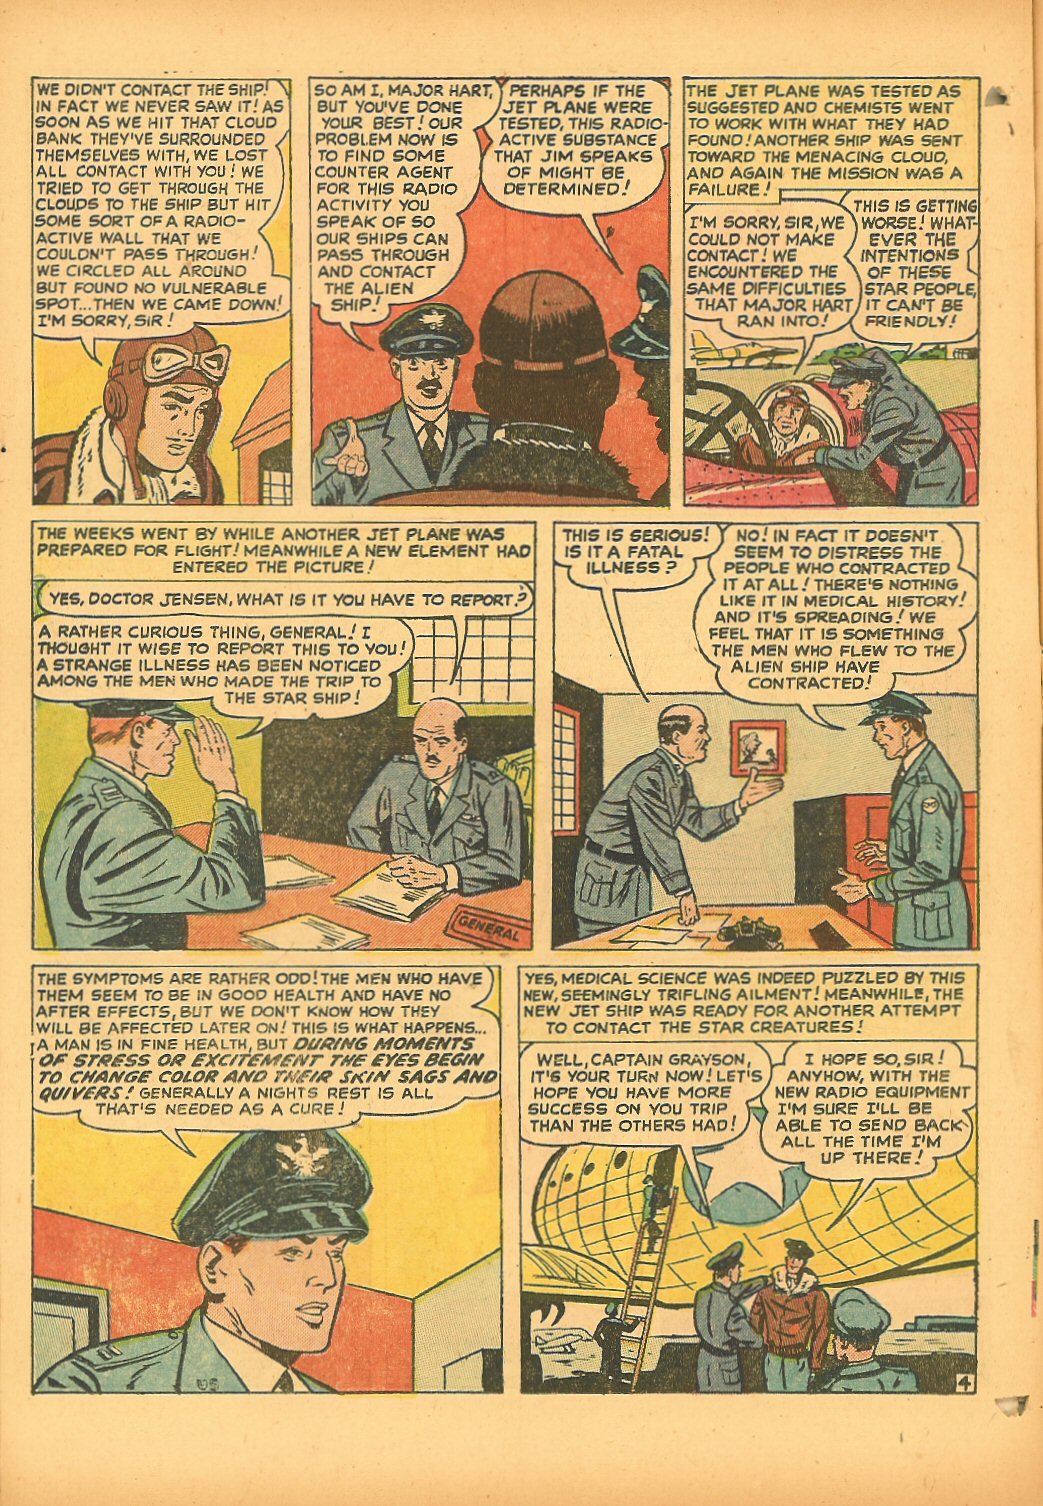 Marvel Tales (1949) 100 Page 11